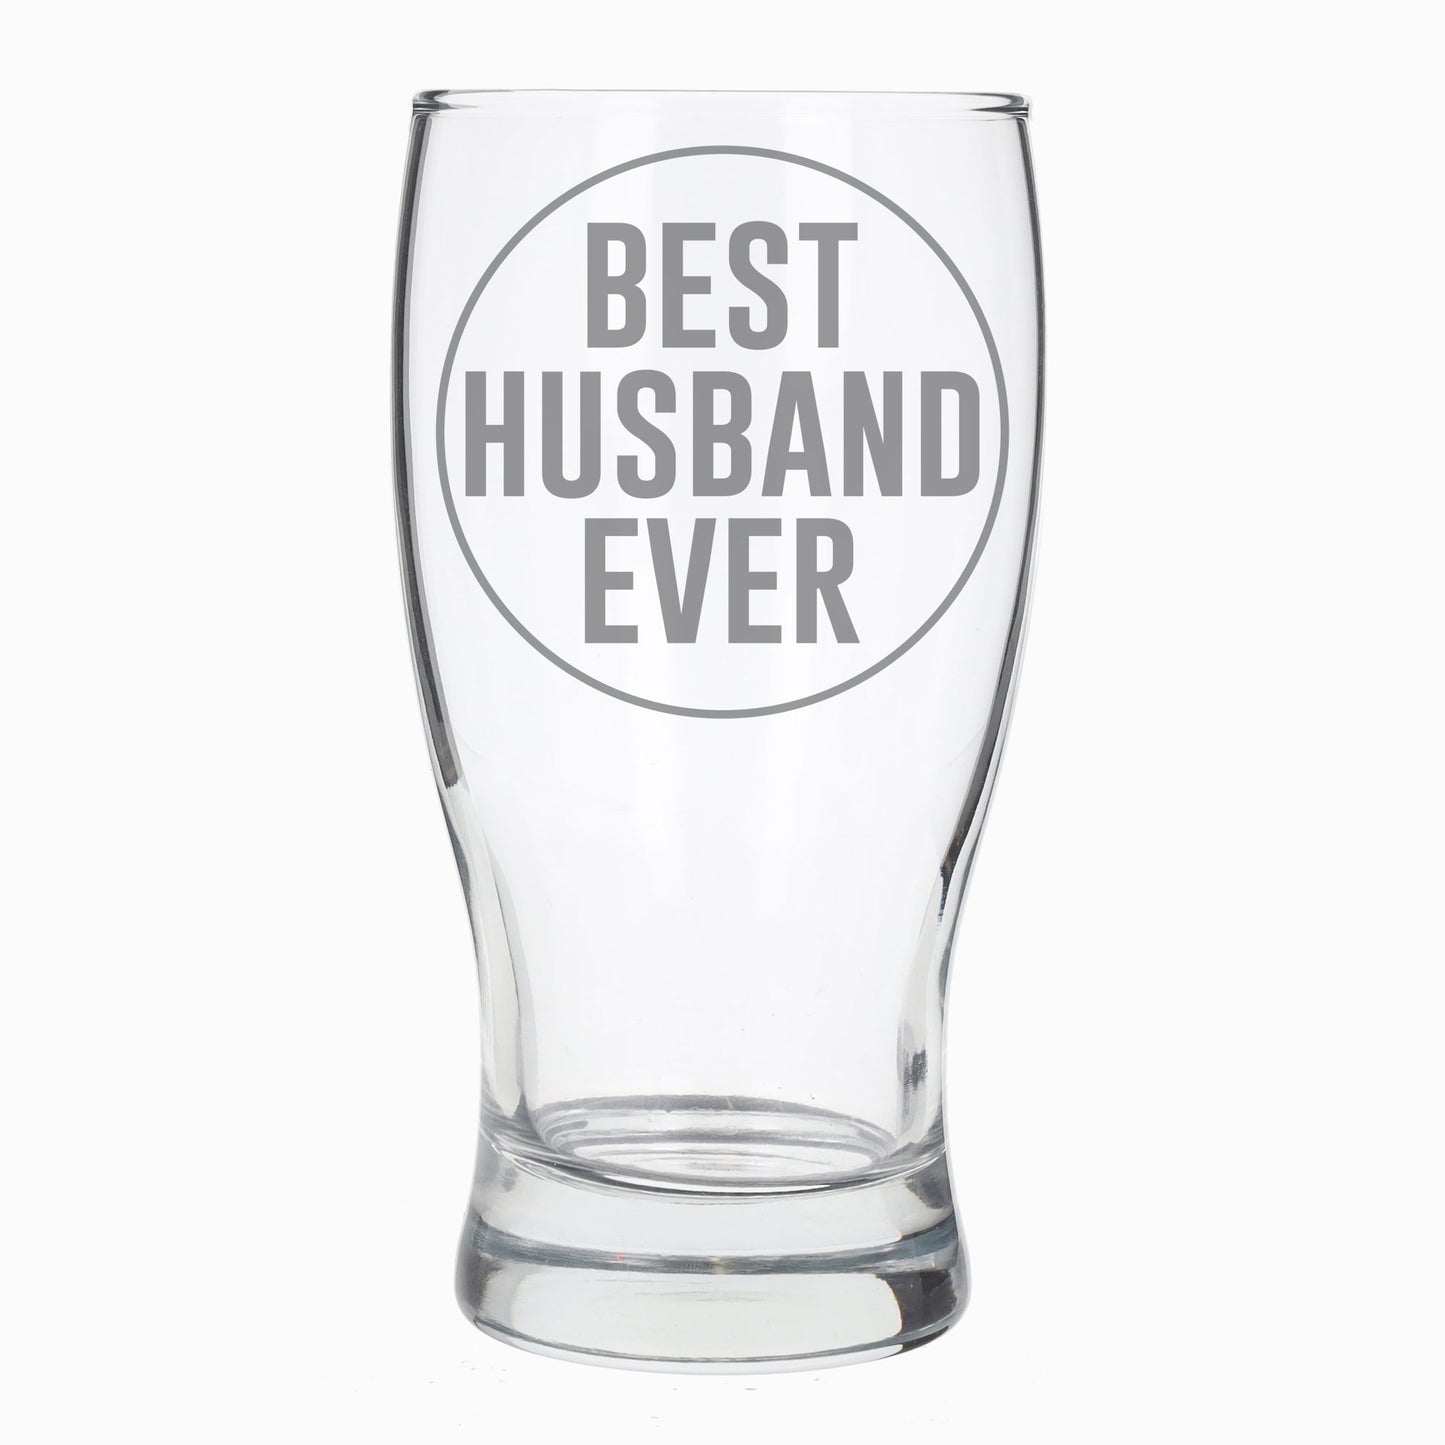 Best Husband Ever Engraved Beer Pint Glass and/or Coaster Set  - Always Looking Good - Beer Glass Only  